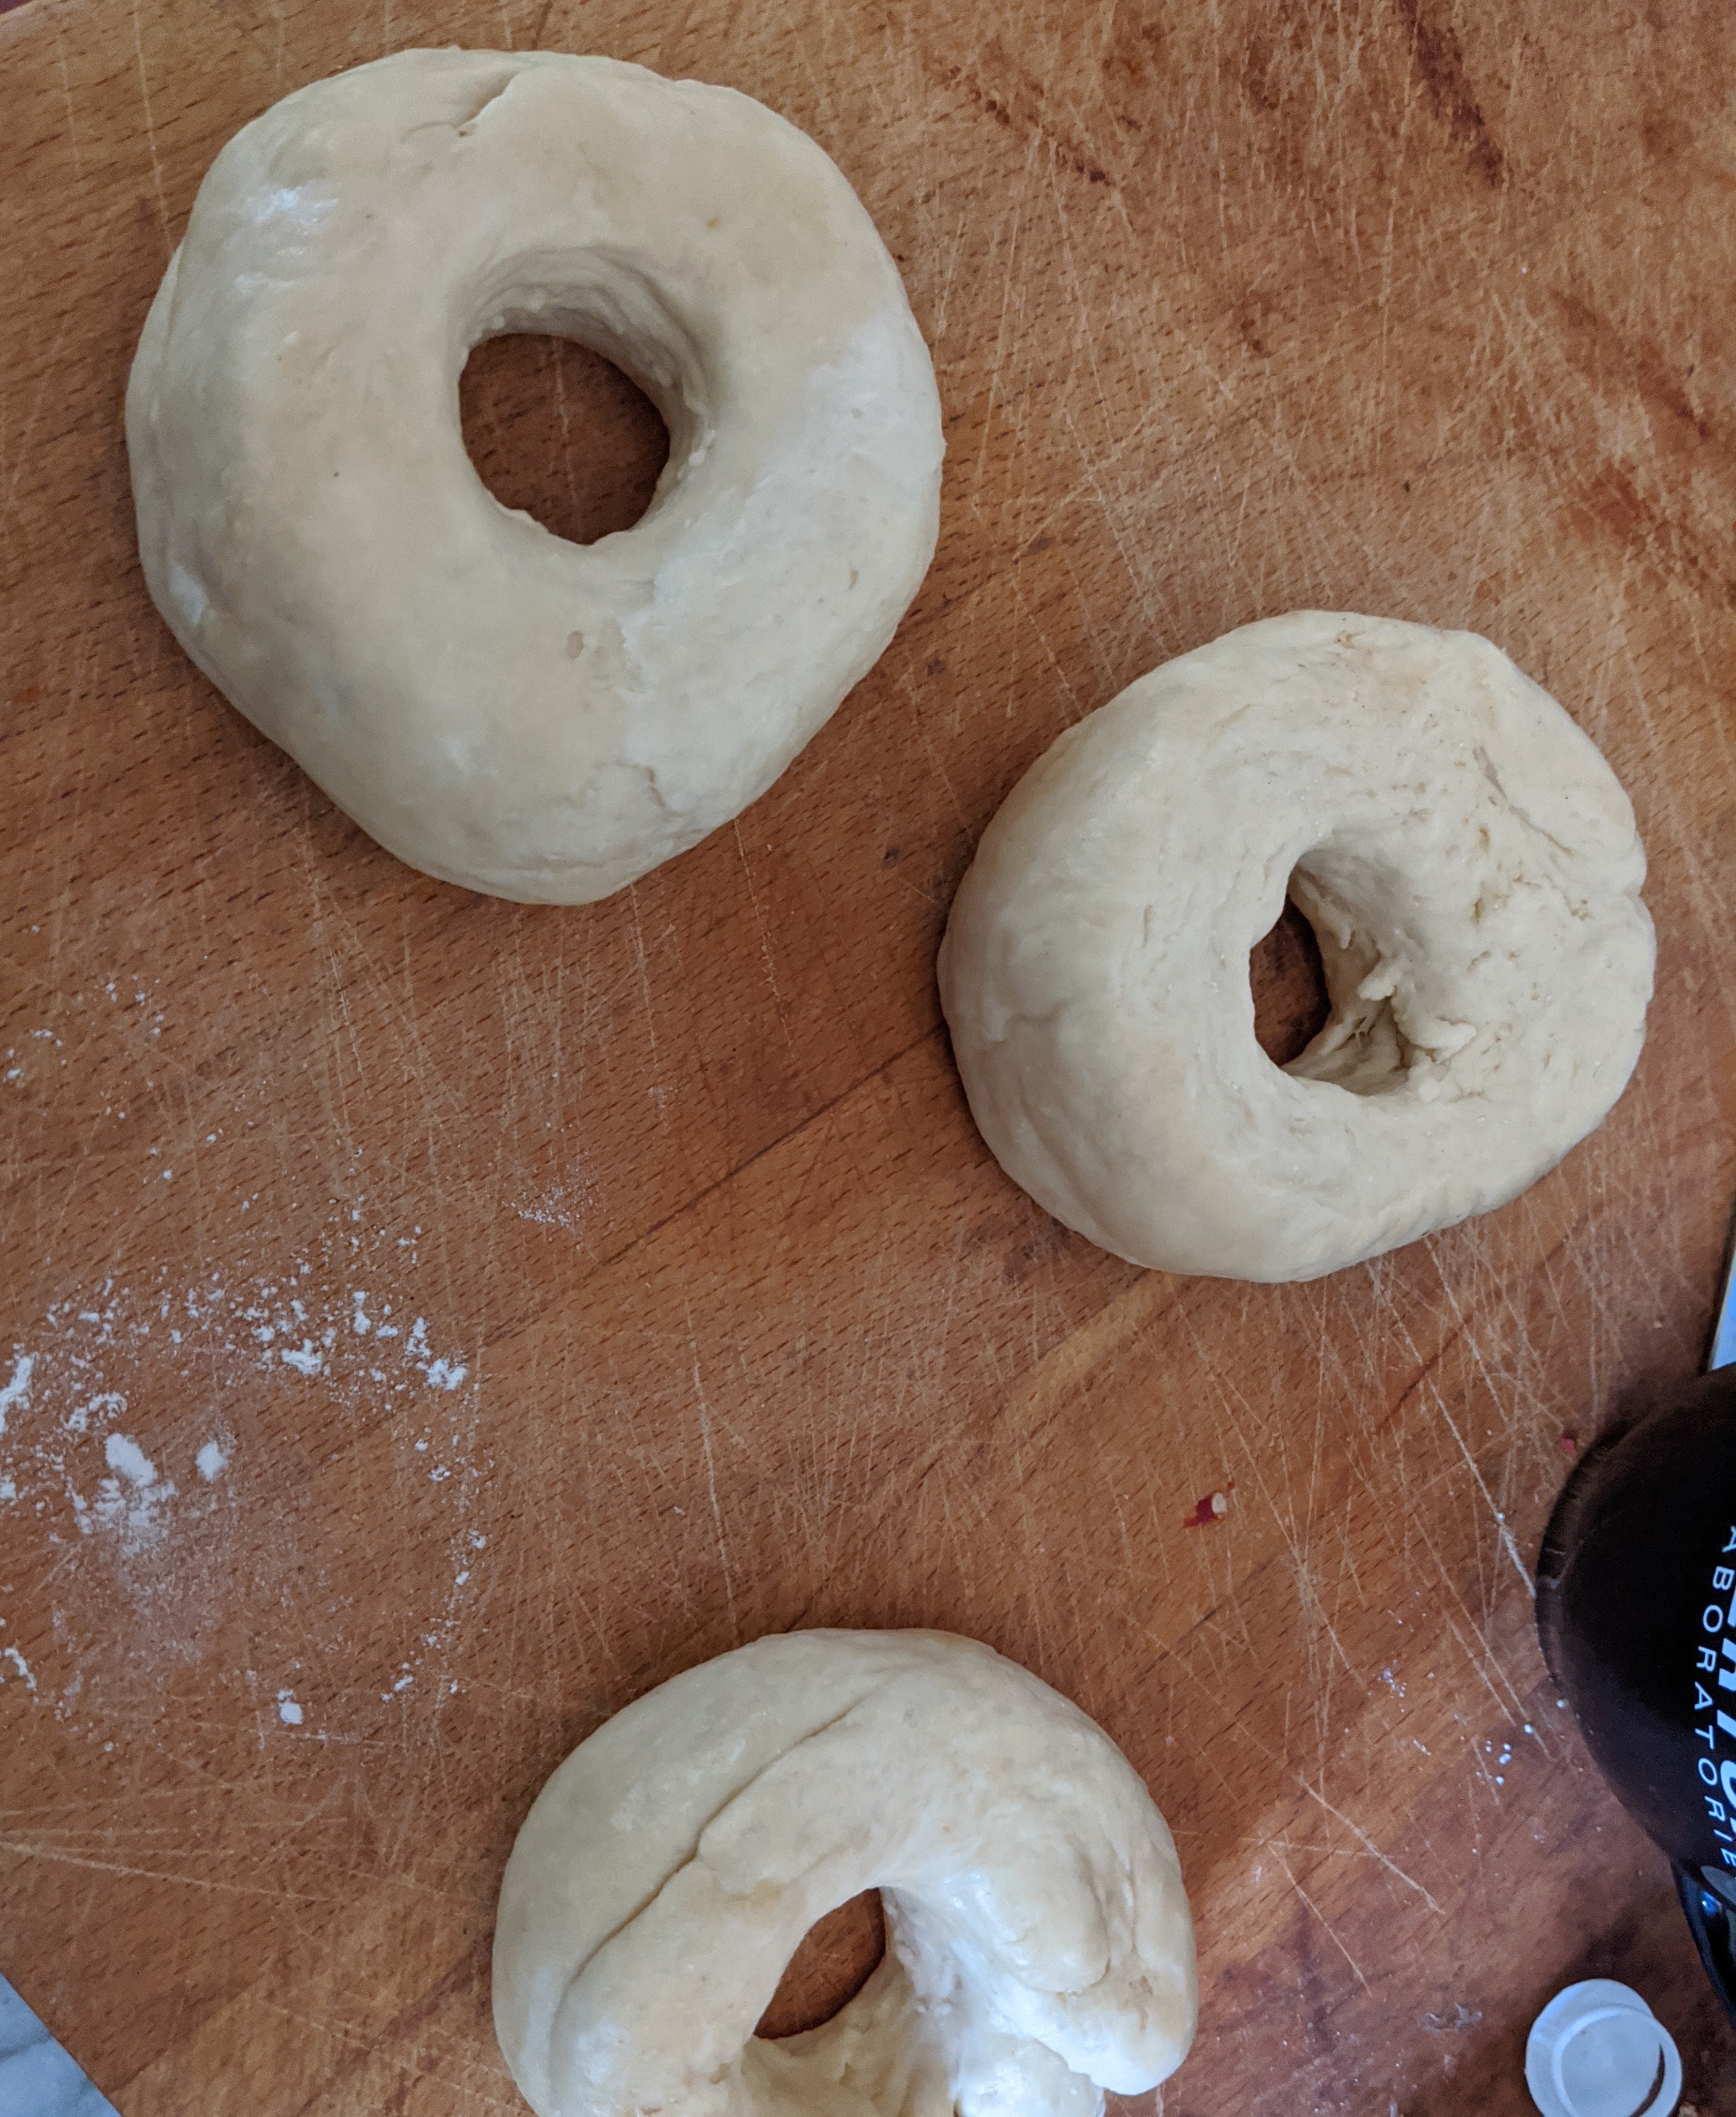 Three bagels in dough form